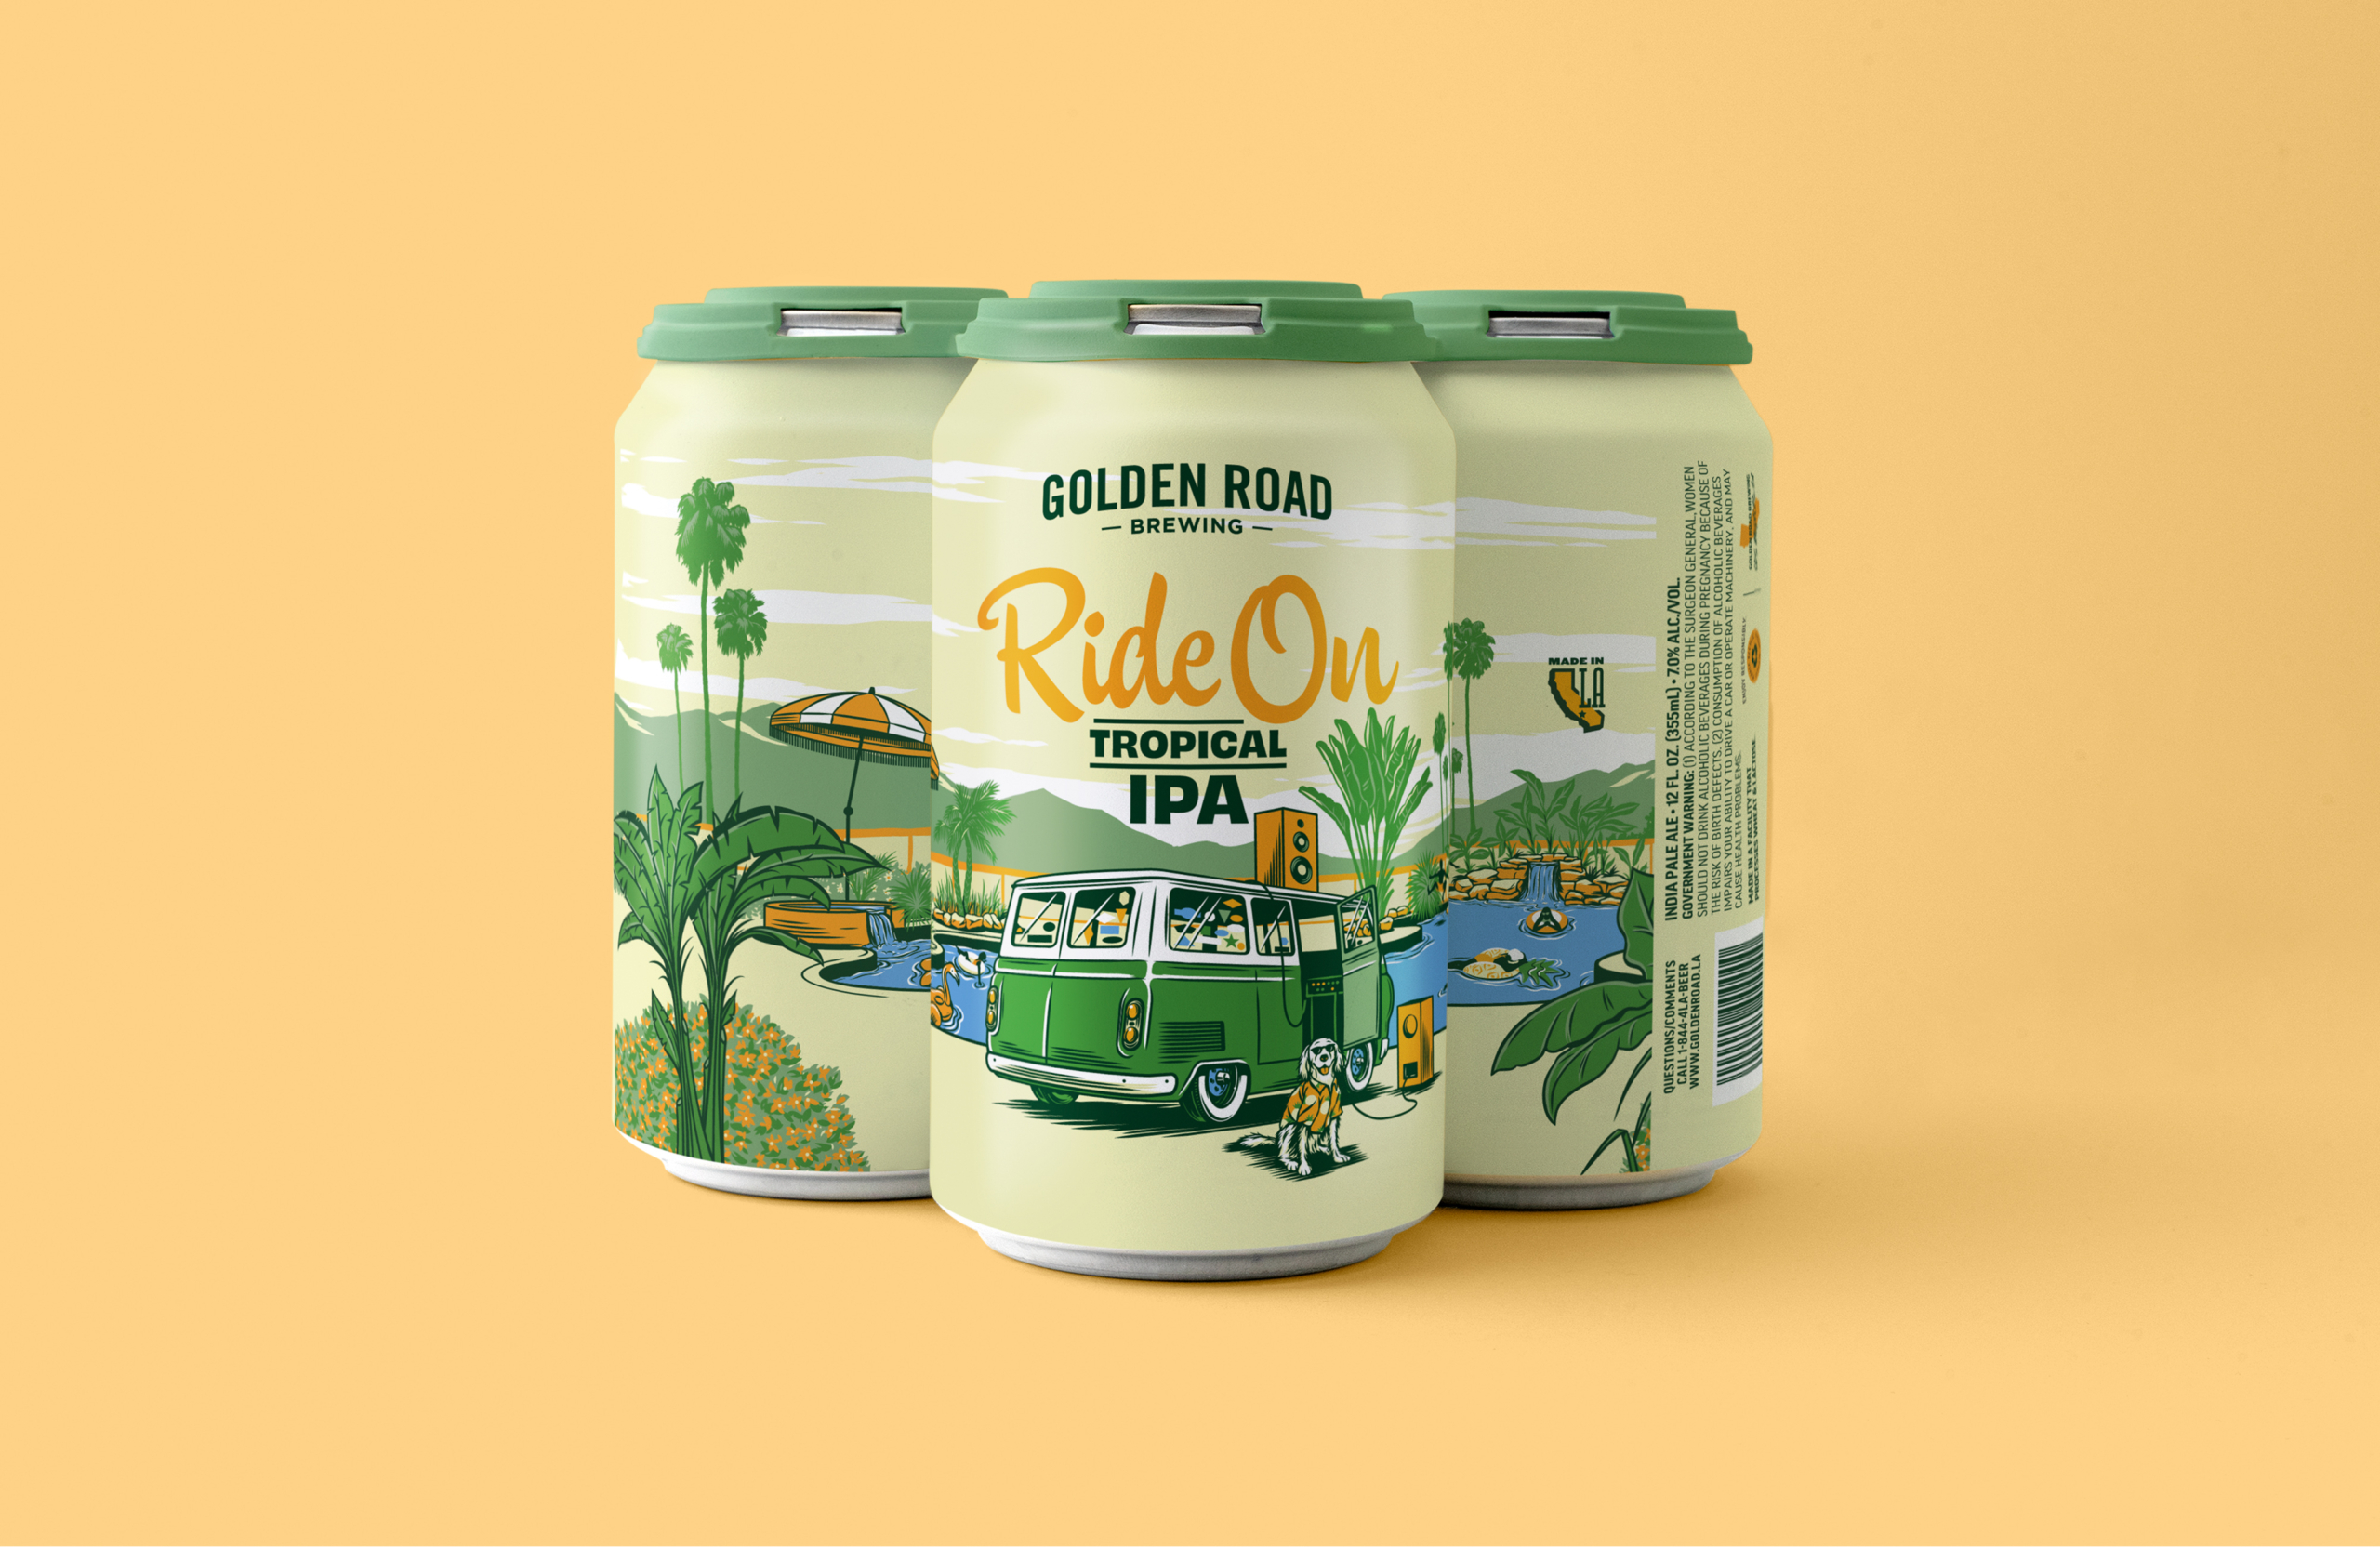 Three cans of Golden Road Ride On Tropical IPA against a yellow background. The can is greenish yellow with an illustration of a vintage green van parked next to a pool. The van has vintage speakers attached to its radio. A dog sits next to the van, implausibly wearing sunglasses and a Hawaiian shirt. The beer name 